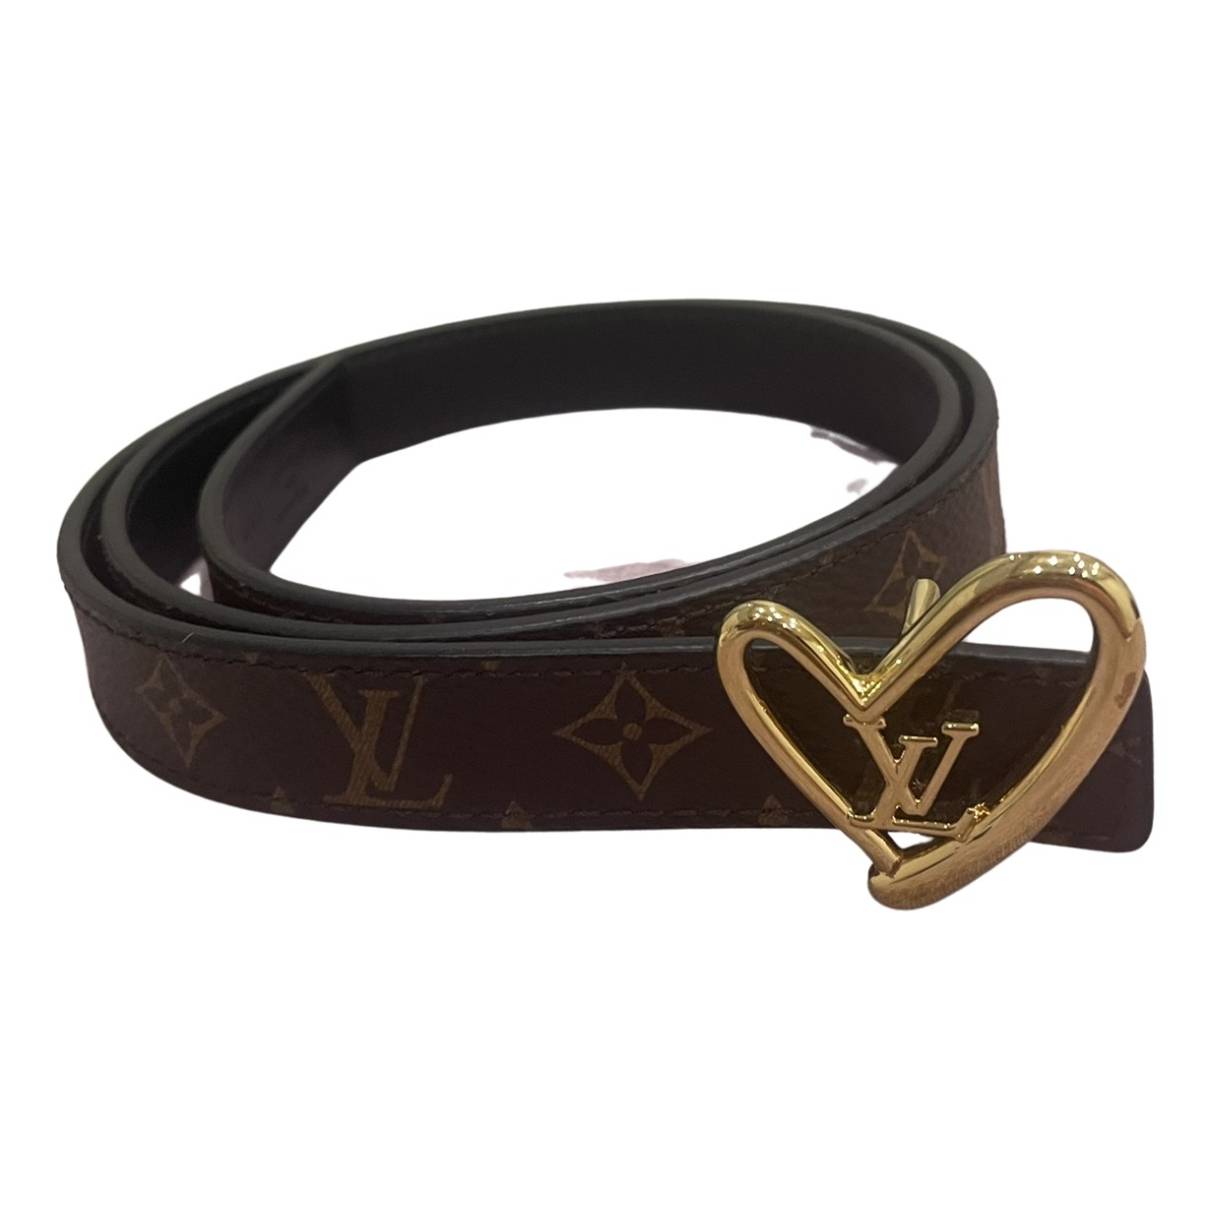 Fall In Love Reversible 20mm Belt Monogram Canvas - Accessories M0430X